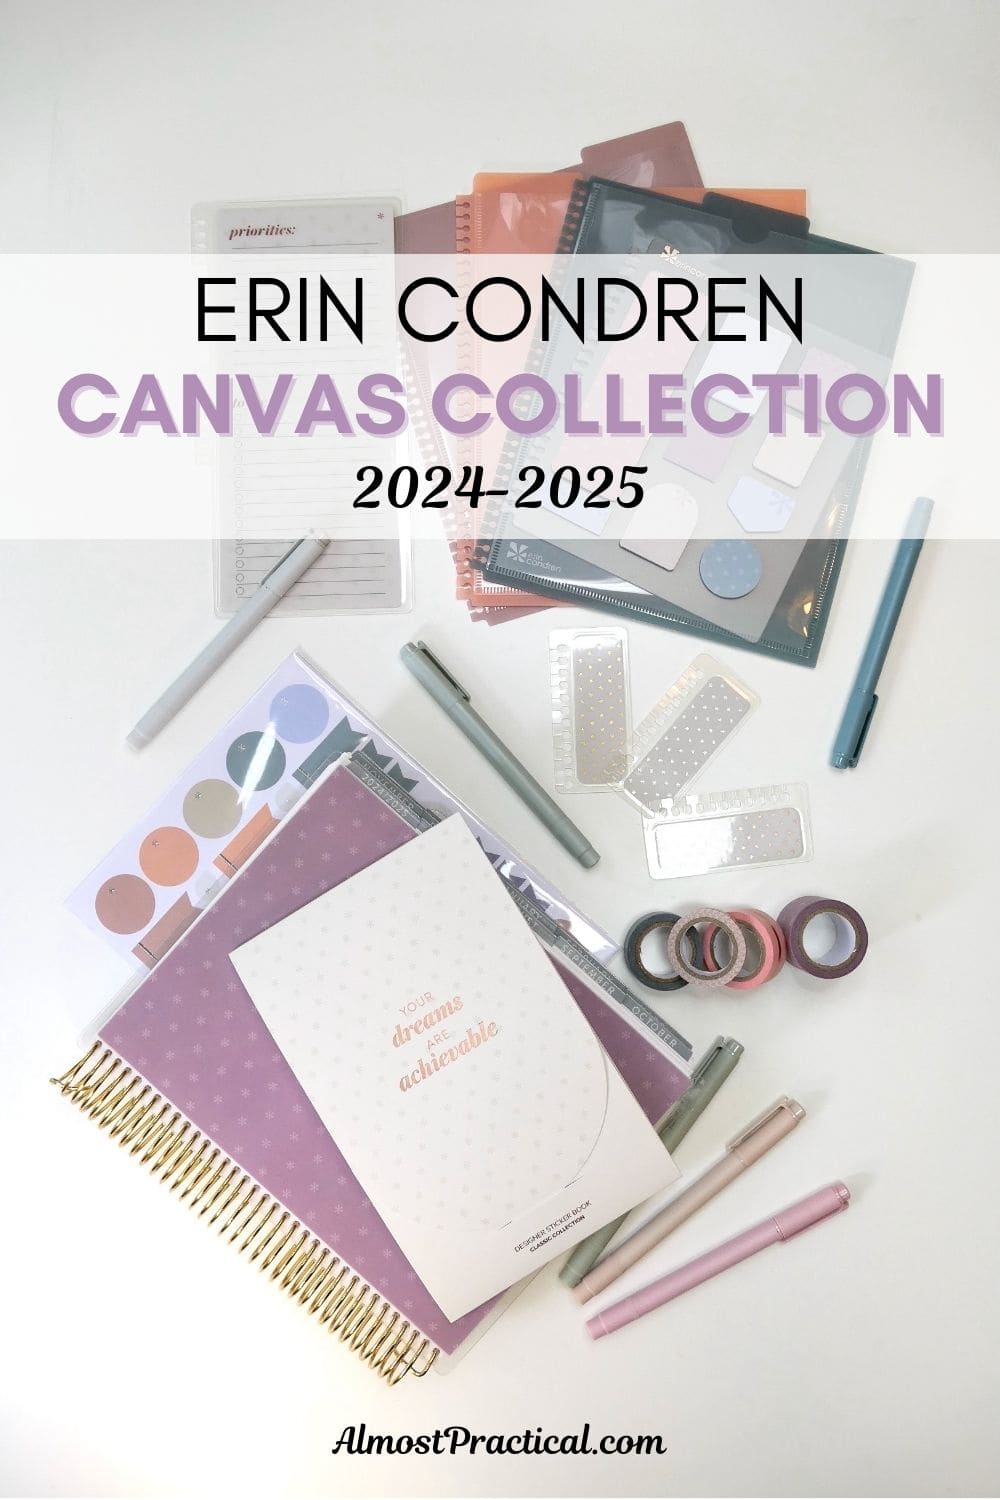 See the Erin Condren Canvas Life Planner for 2024/2025!